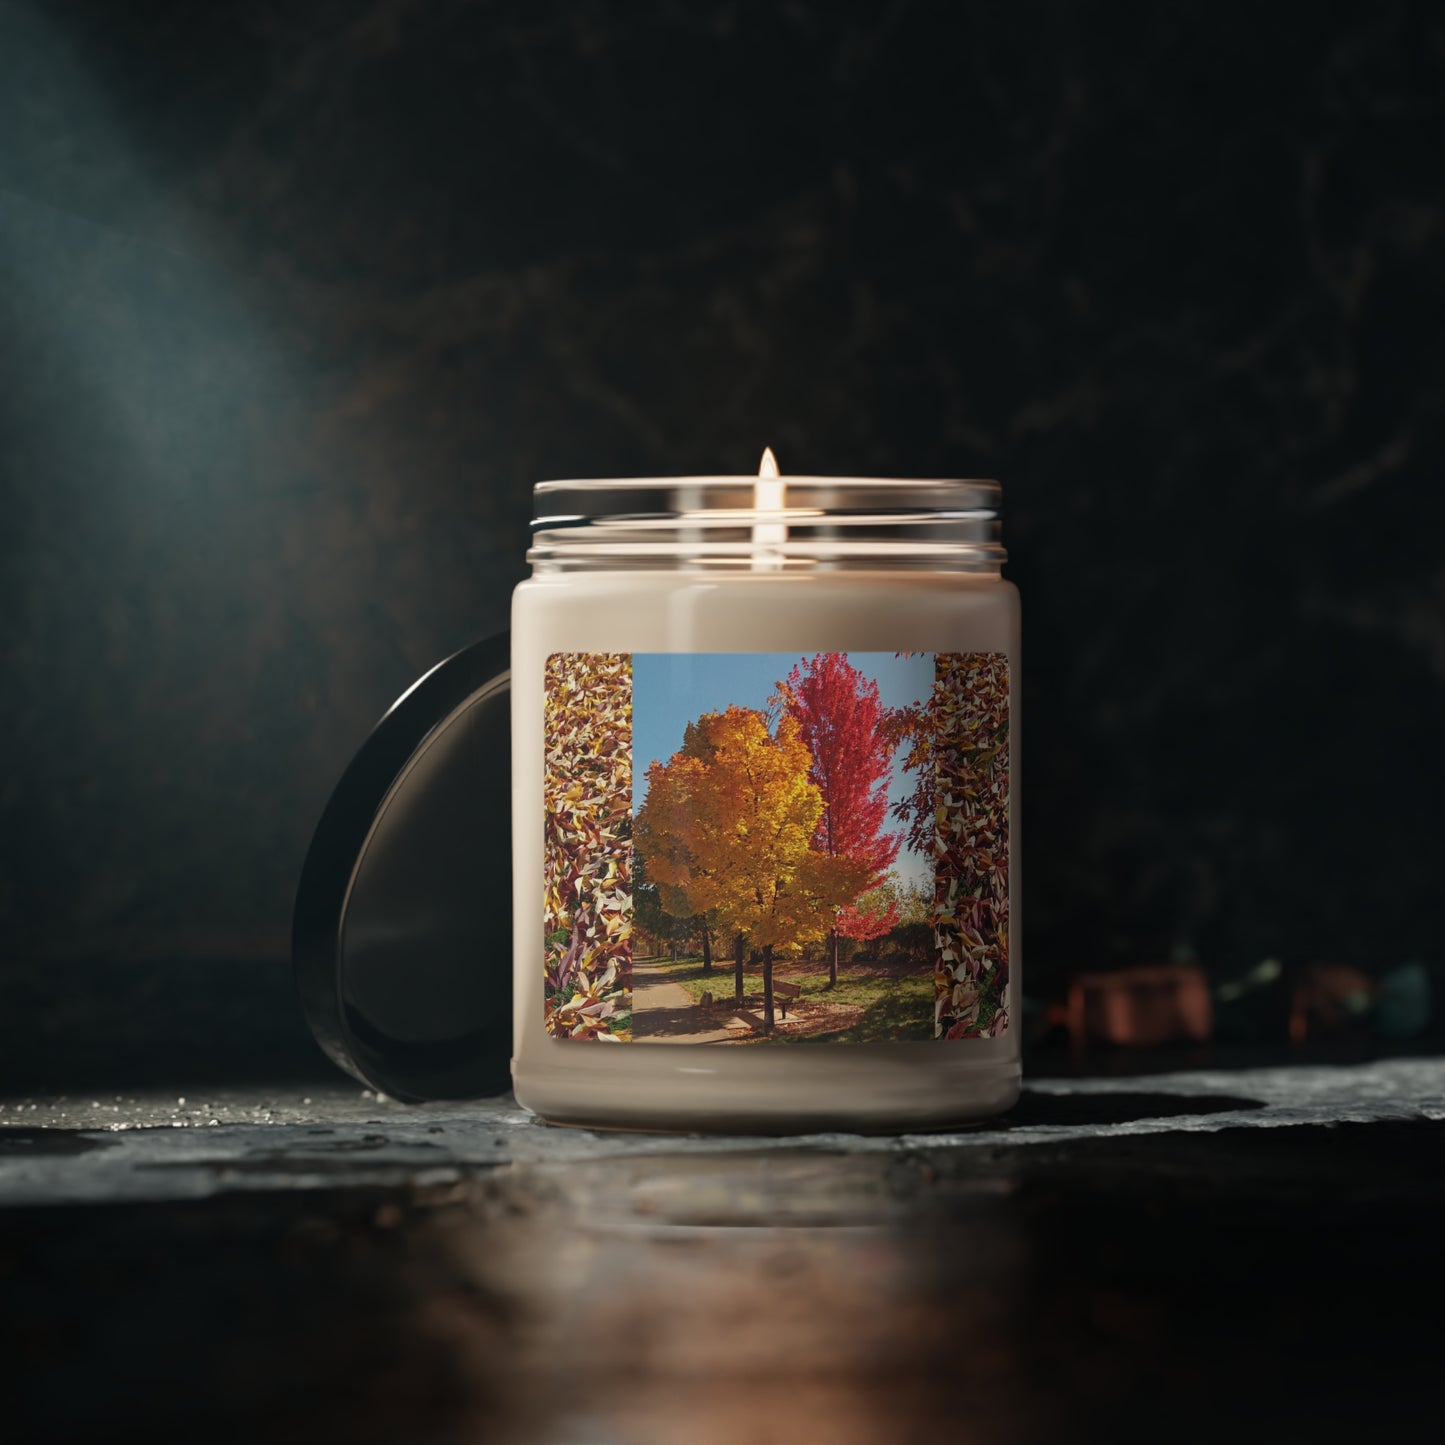 Autumn Bench Scented Soy Candle, 9oz